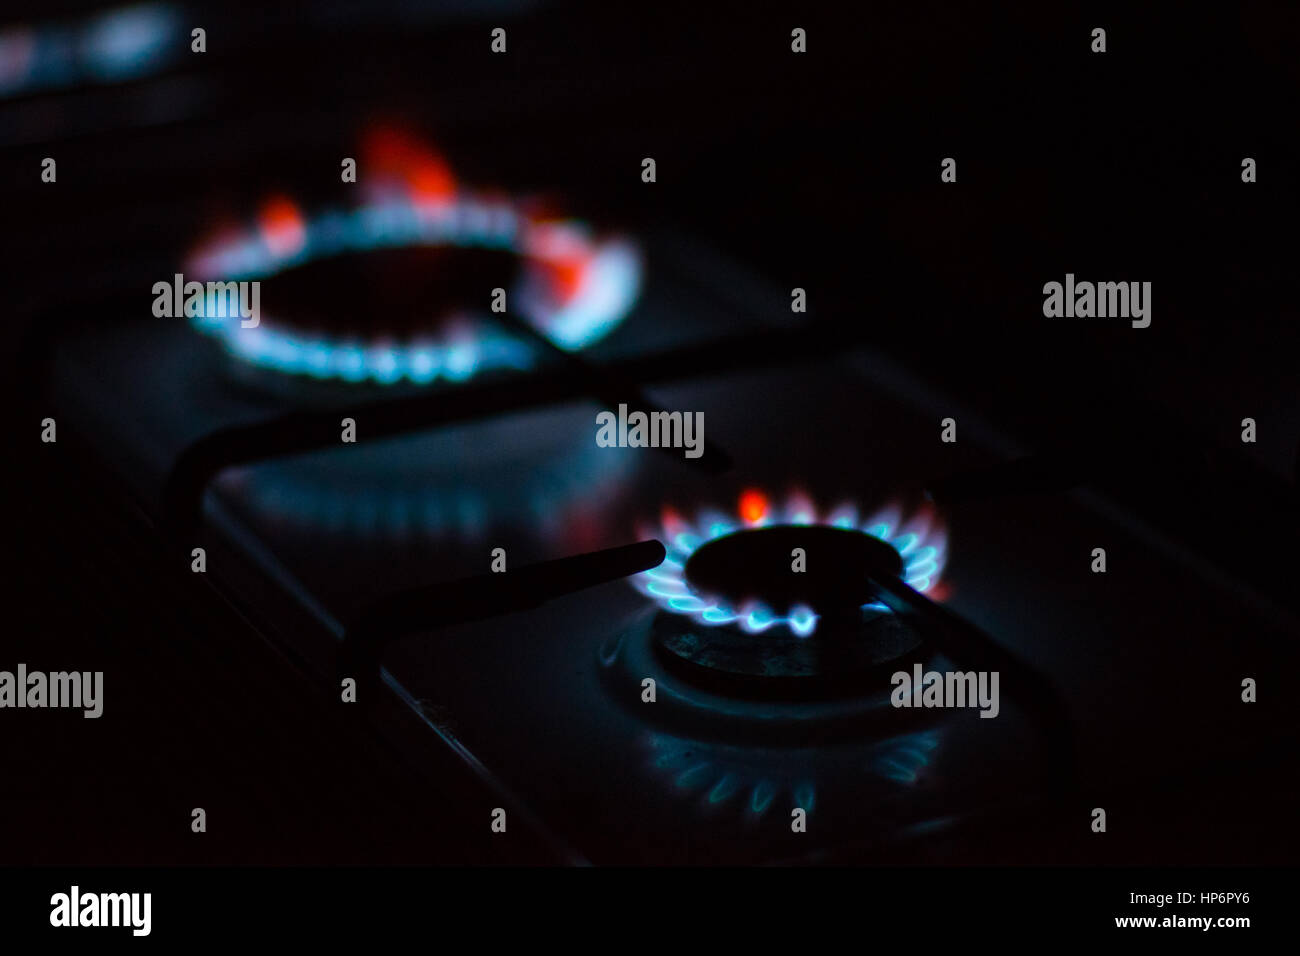 Flames of gas burners on stove Stock Photo